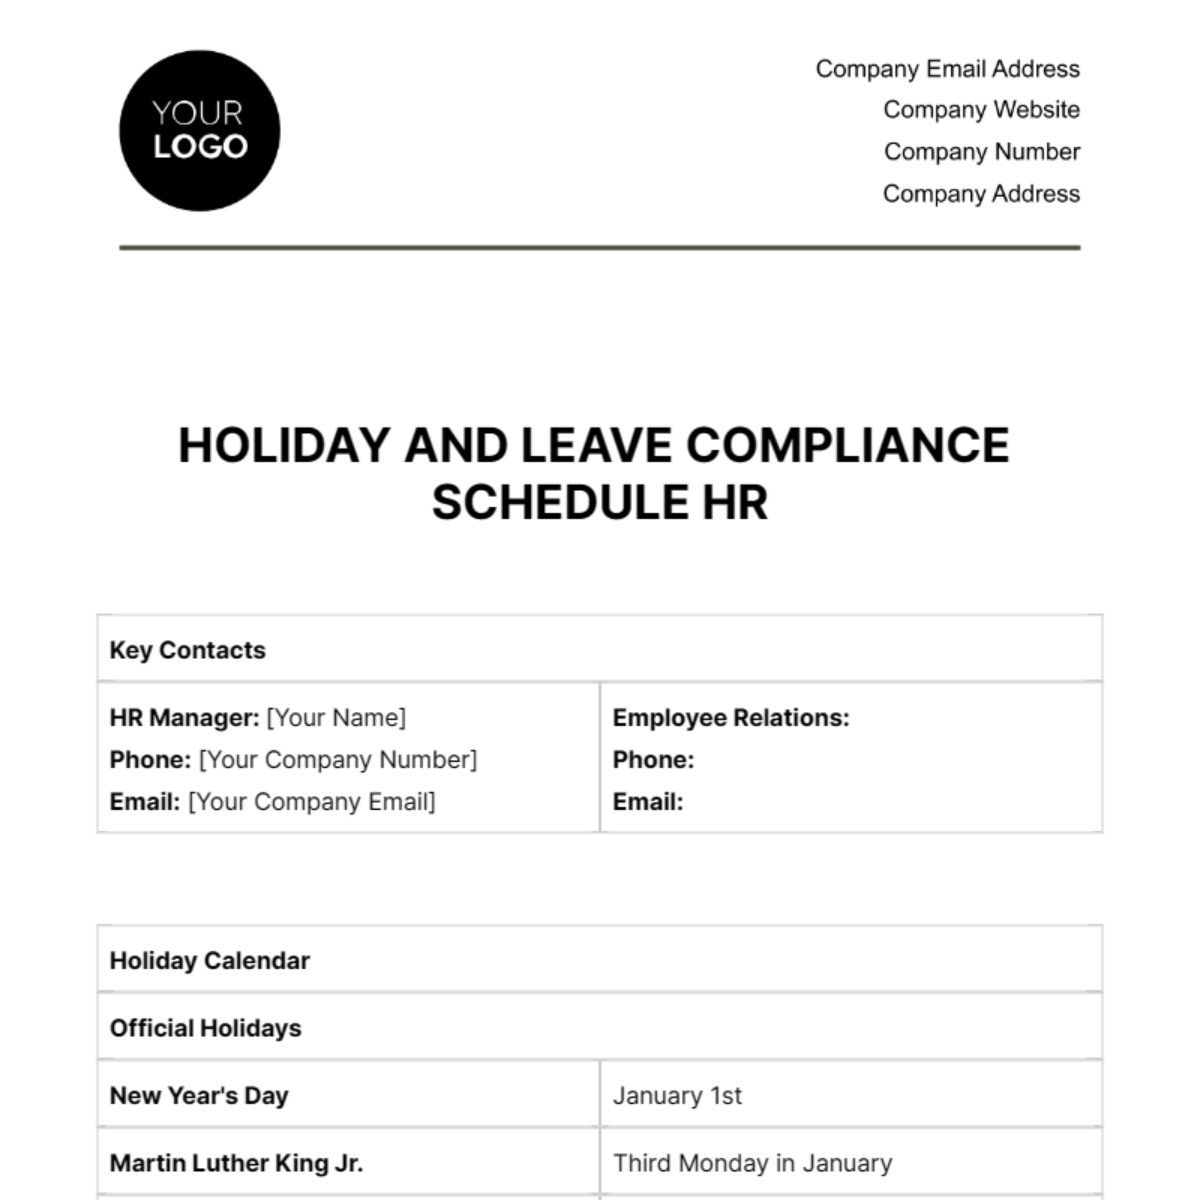 Holiday and Leave Compliance Schedule HR Template